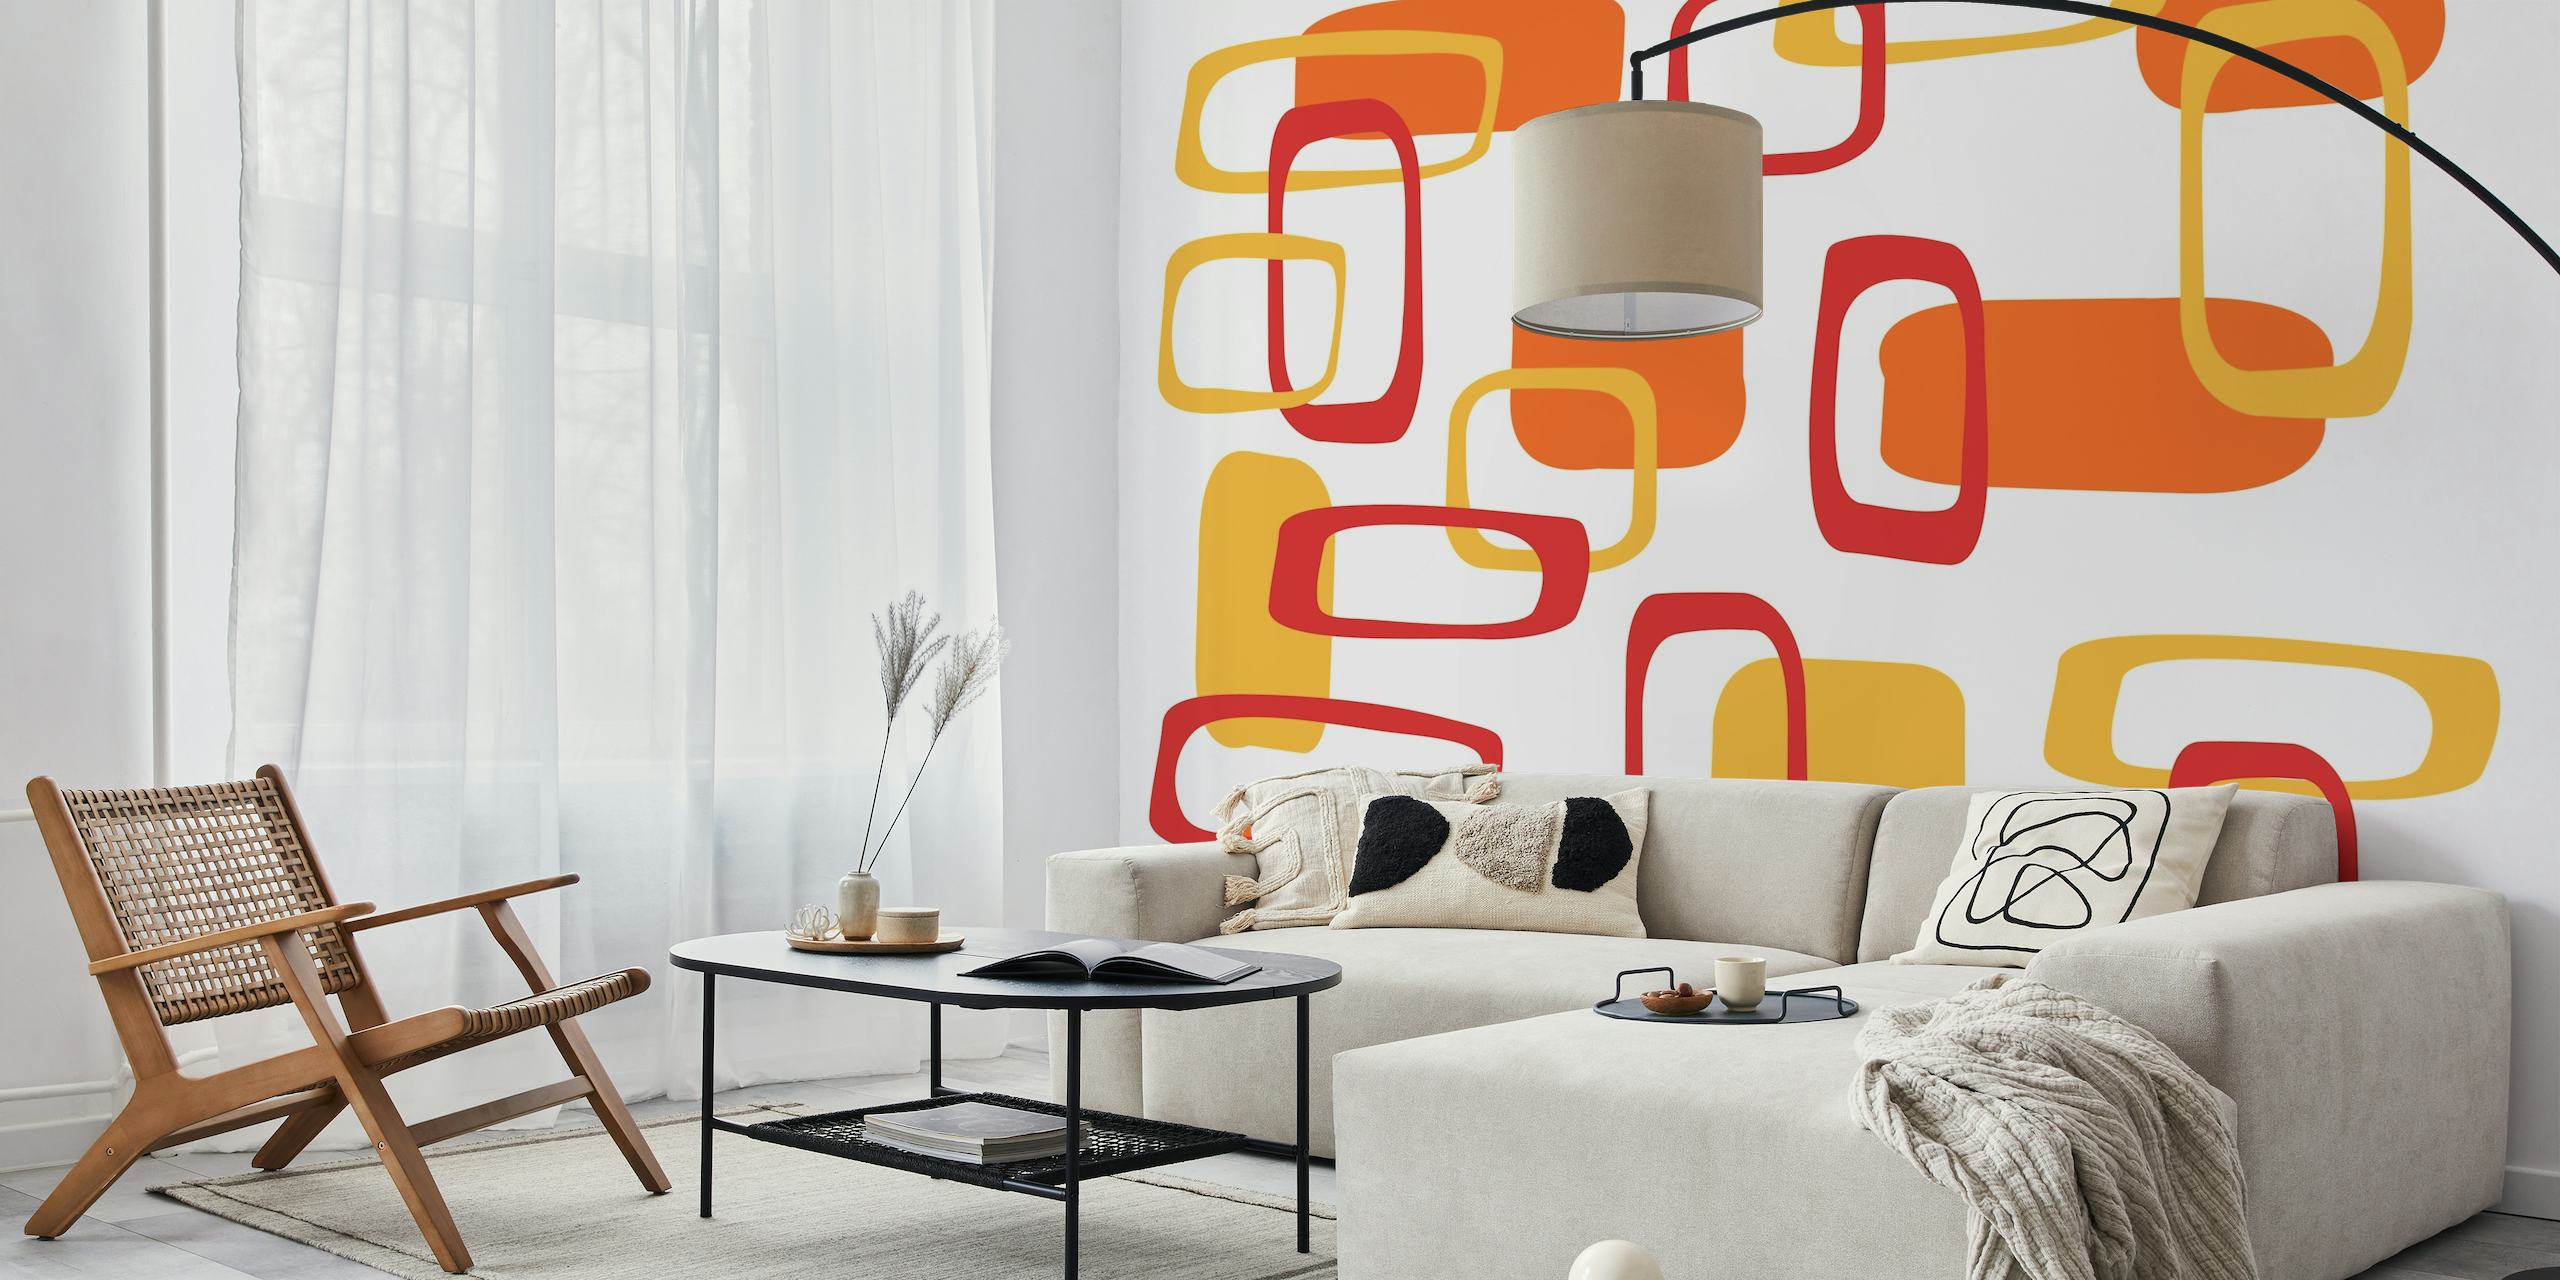 Retro-inspired wall mural with mid-century squares in 70s colors